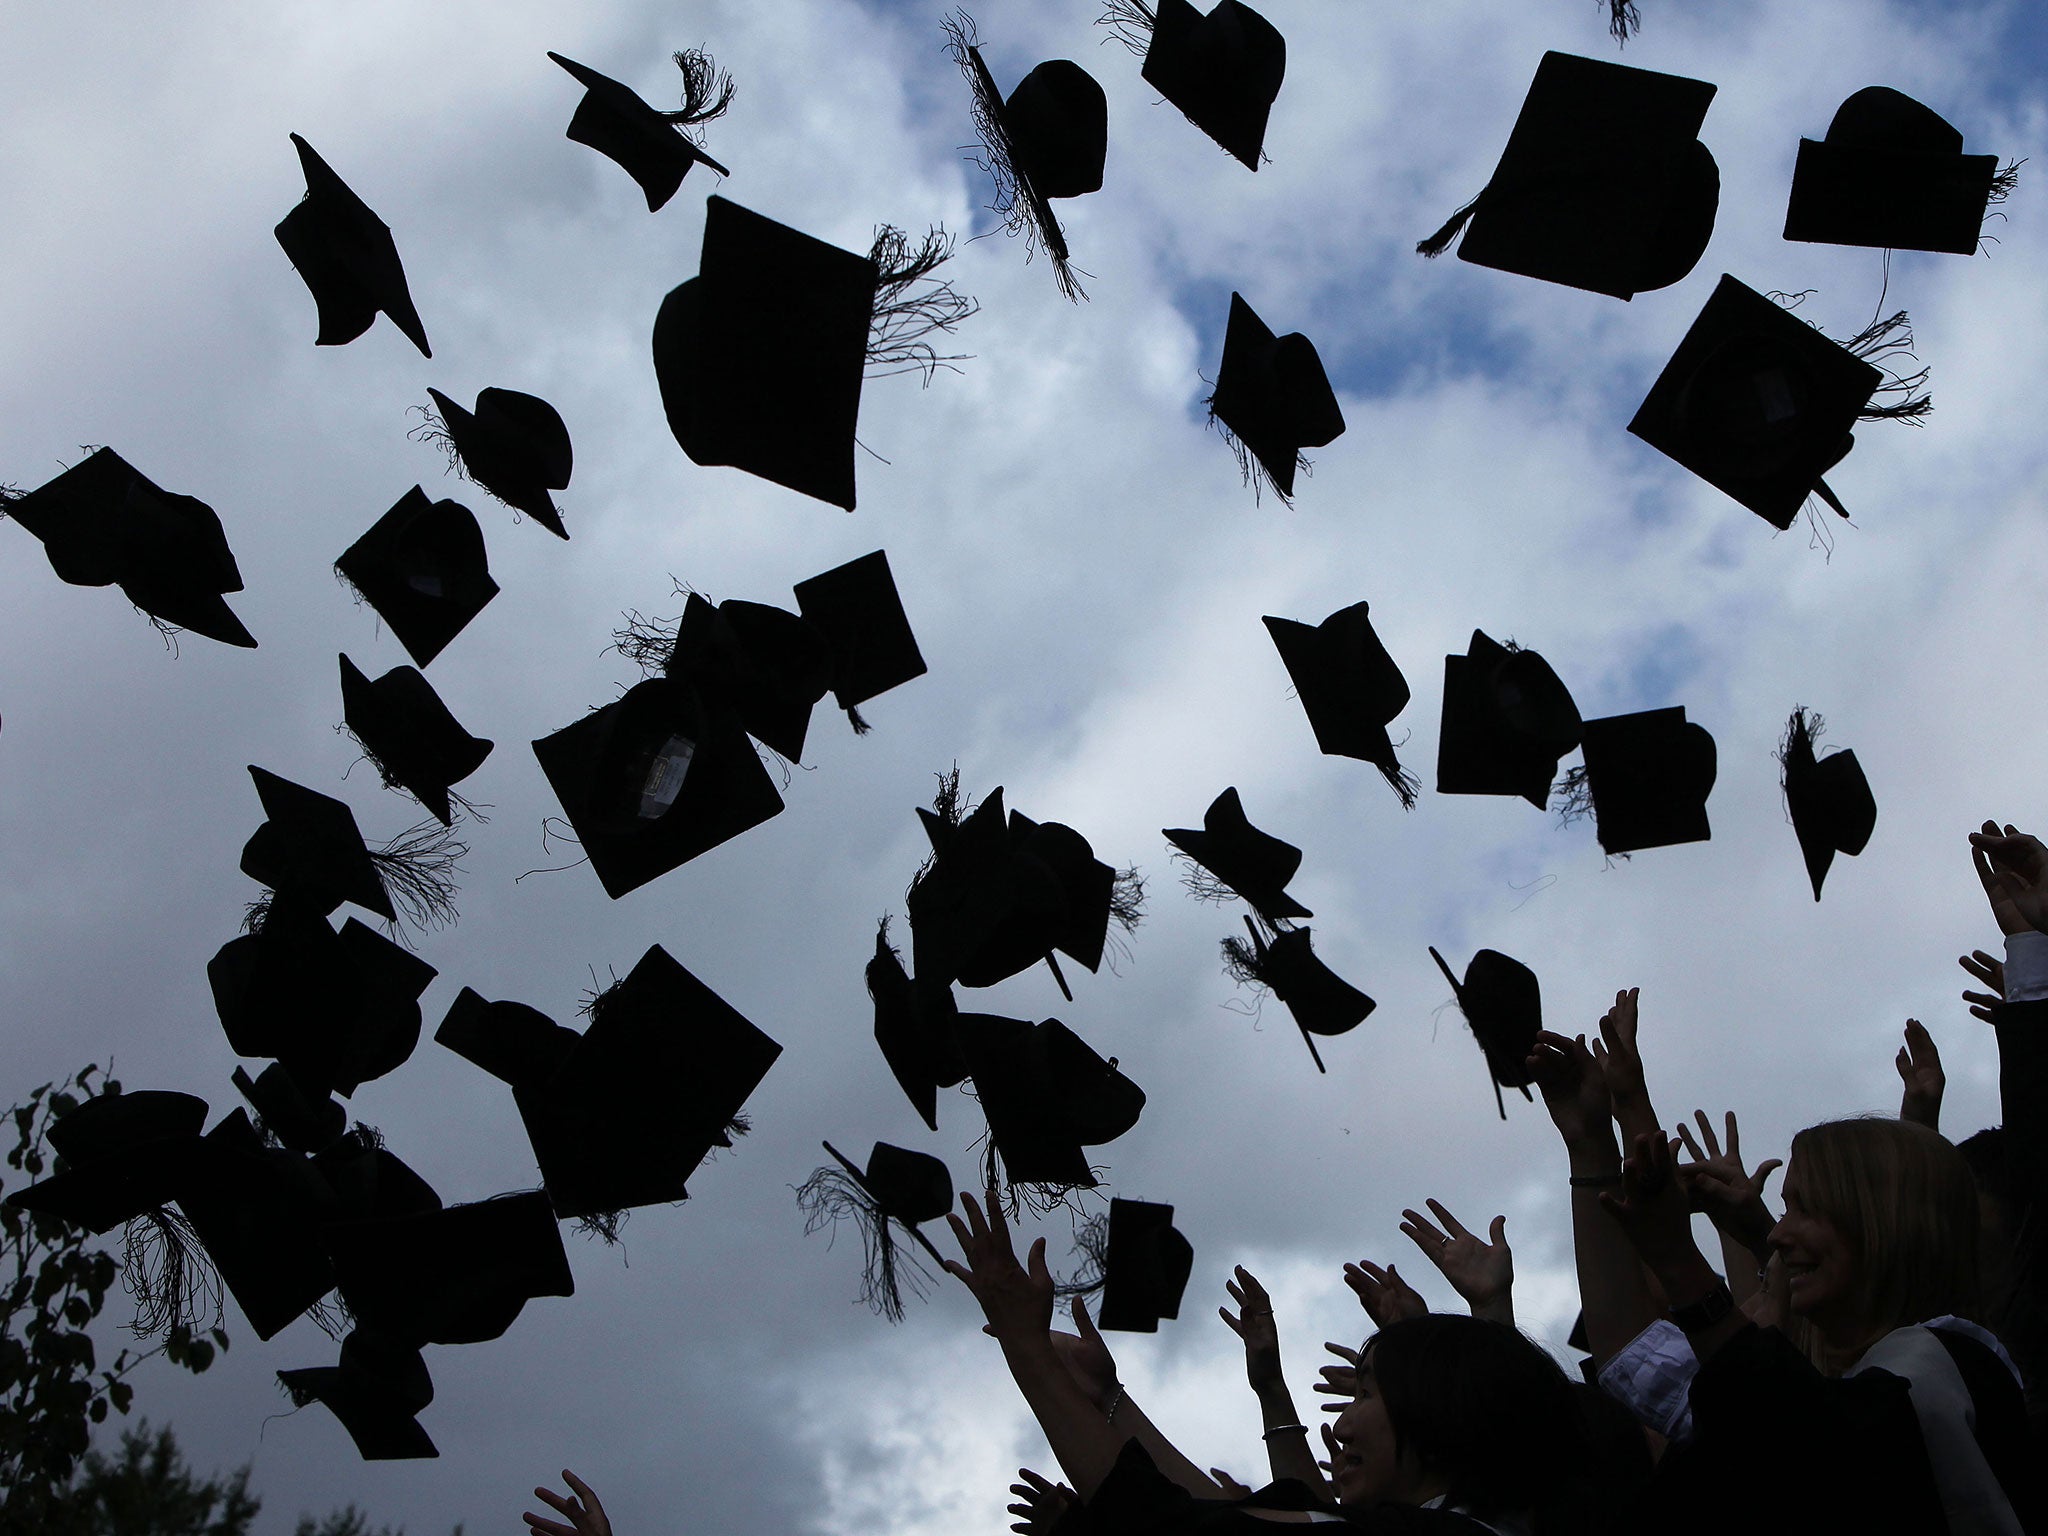 Graduates in England could be left to pay out more than £100,000 for their loans – double the amount initially borrowed